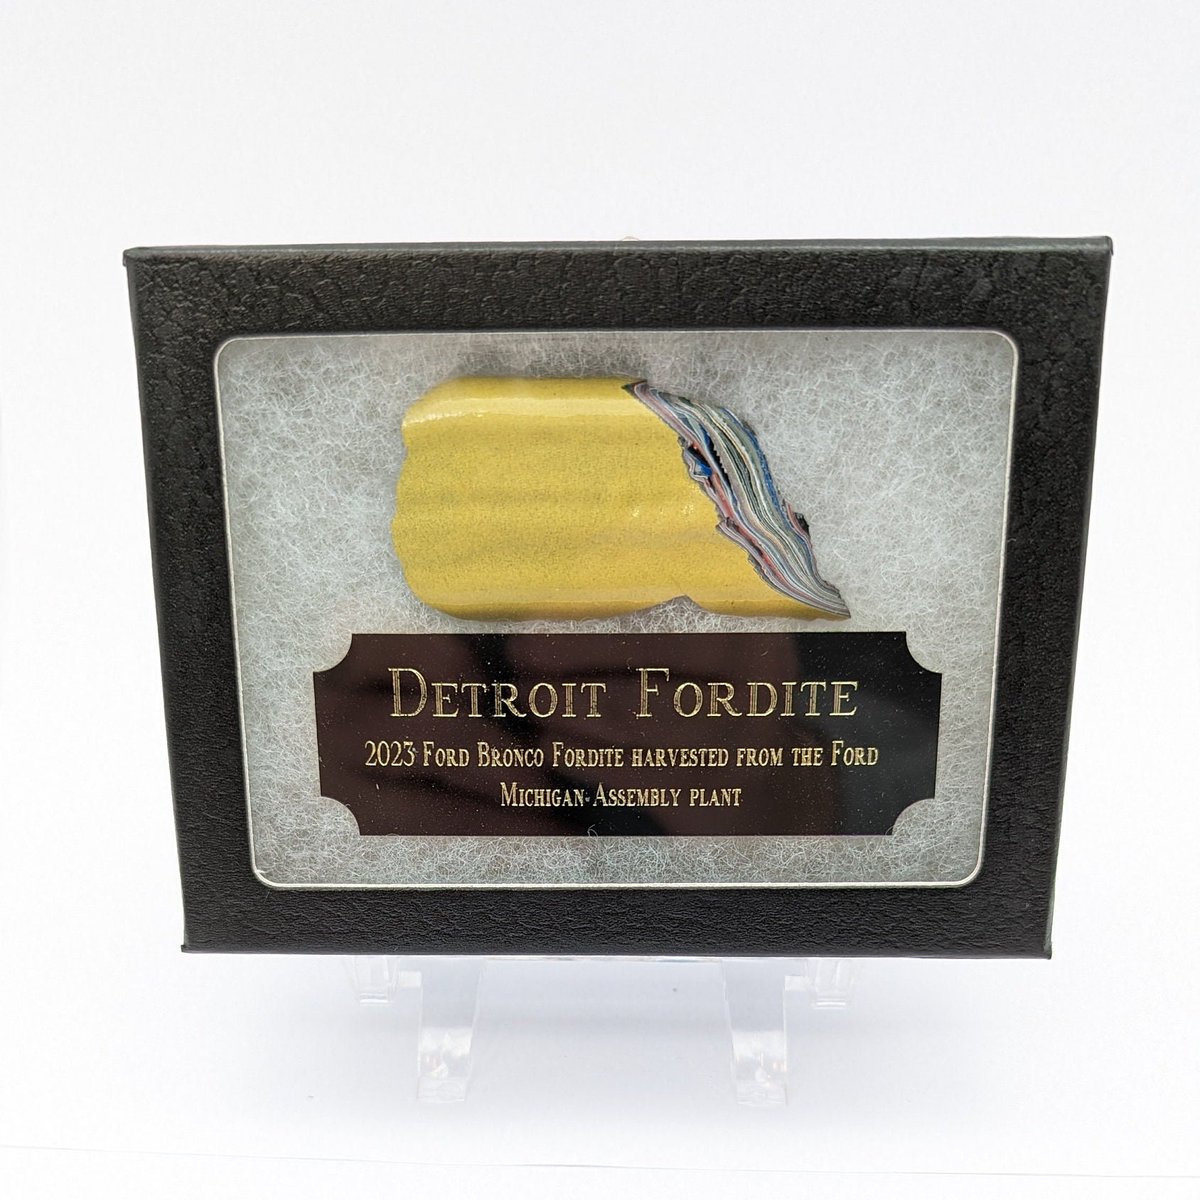 Excited to share the latest addition to my #etsy shop: Detroit Fordite Mini Museum 2023 Fordite specimen Yellowstone Fordite in a rikers display box with bass plaque staying year type and origin etsy.me/3ZgzsNb # #ford #yellowstone #minimuseum #bronco